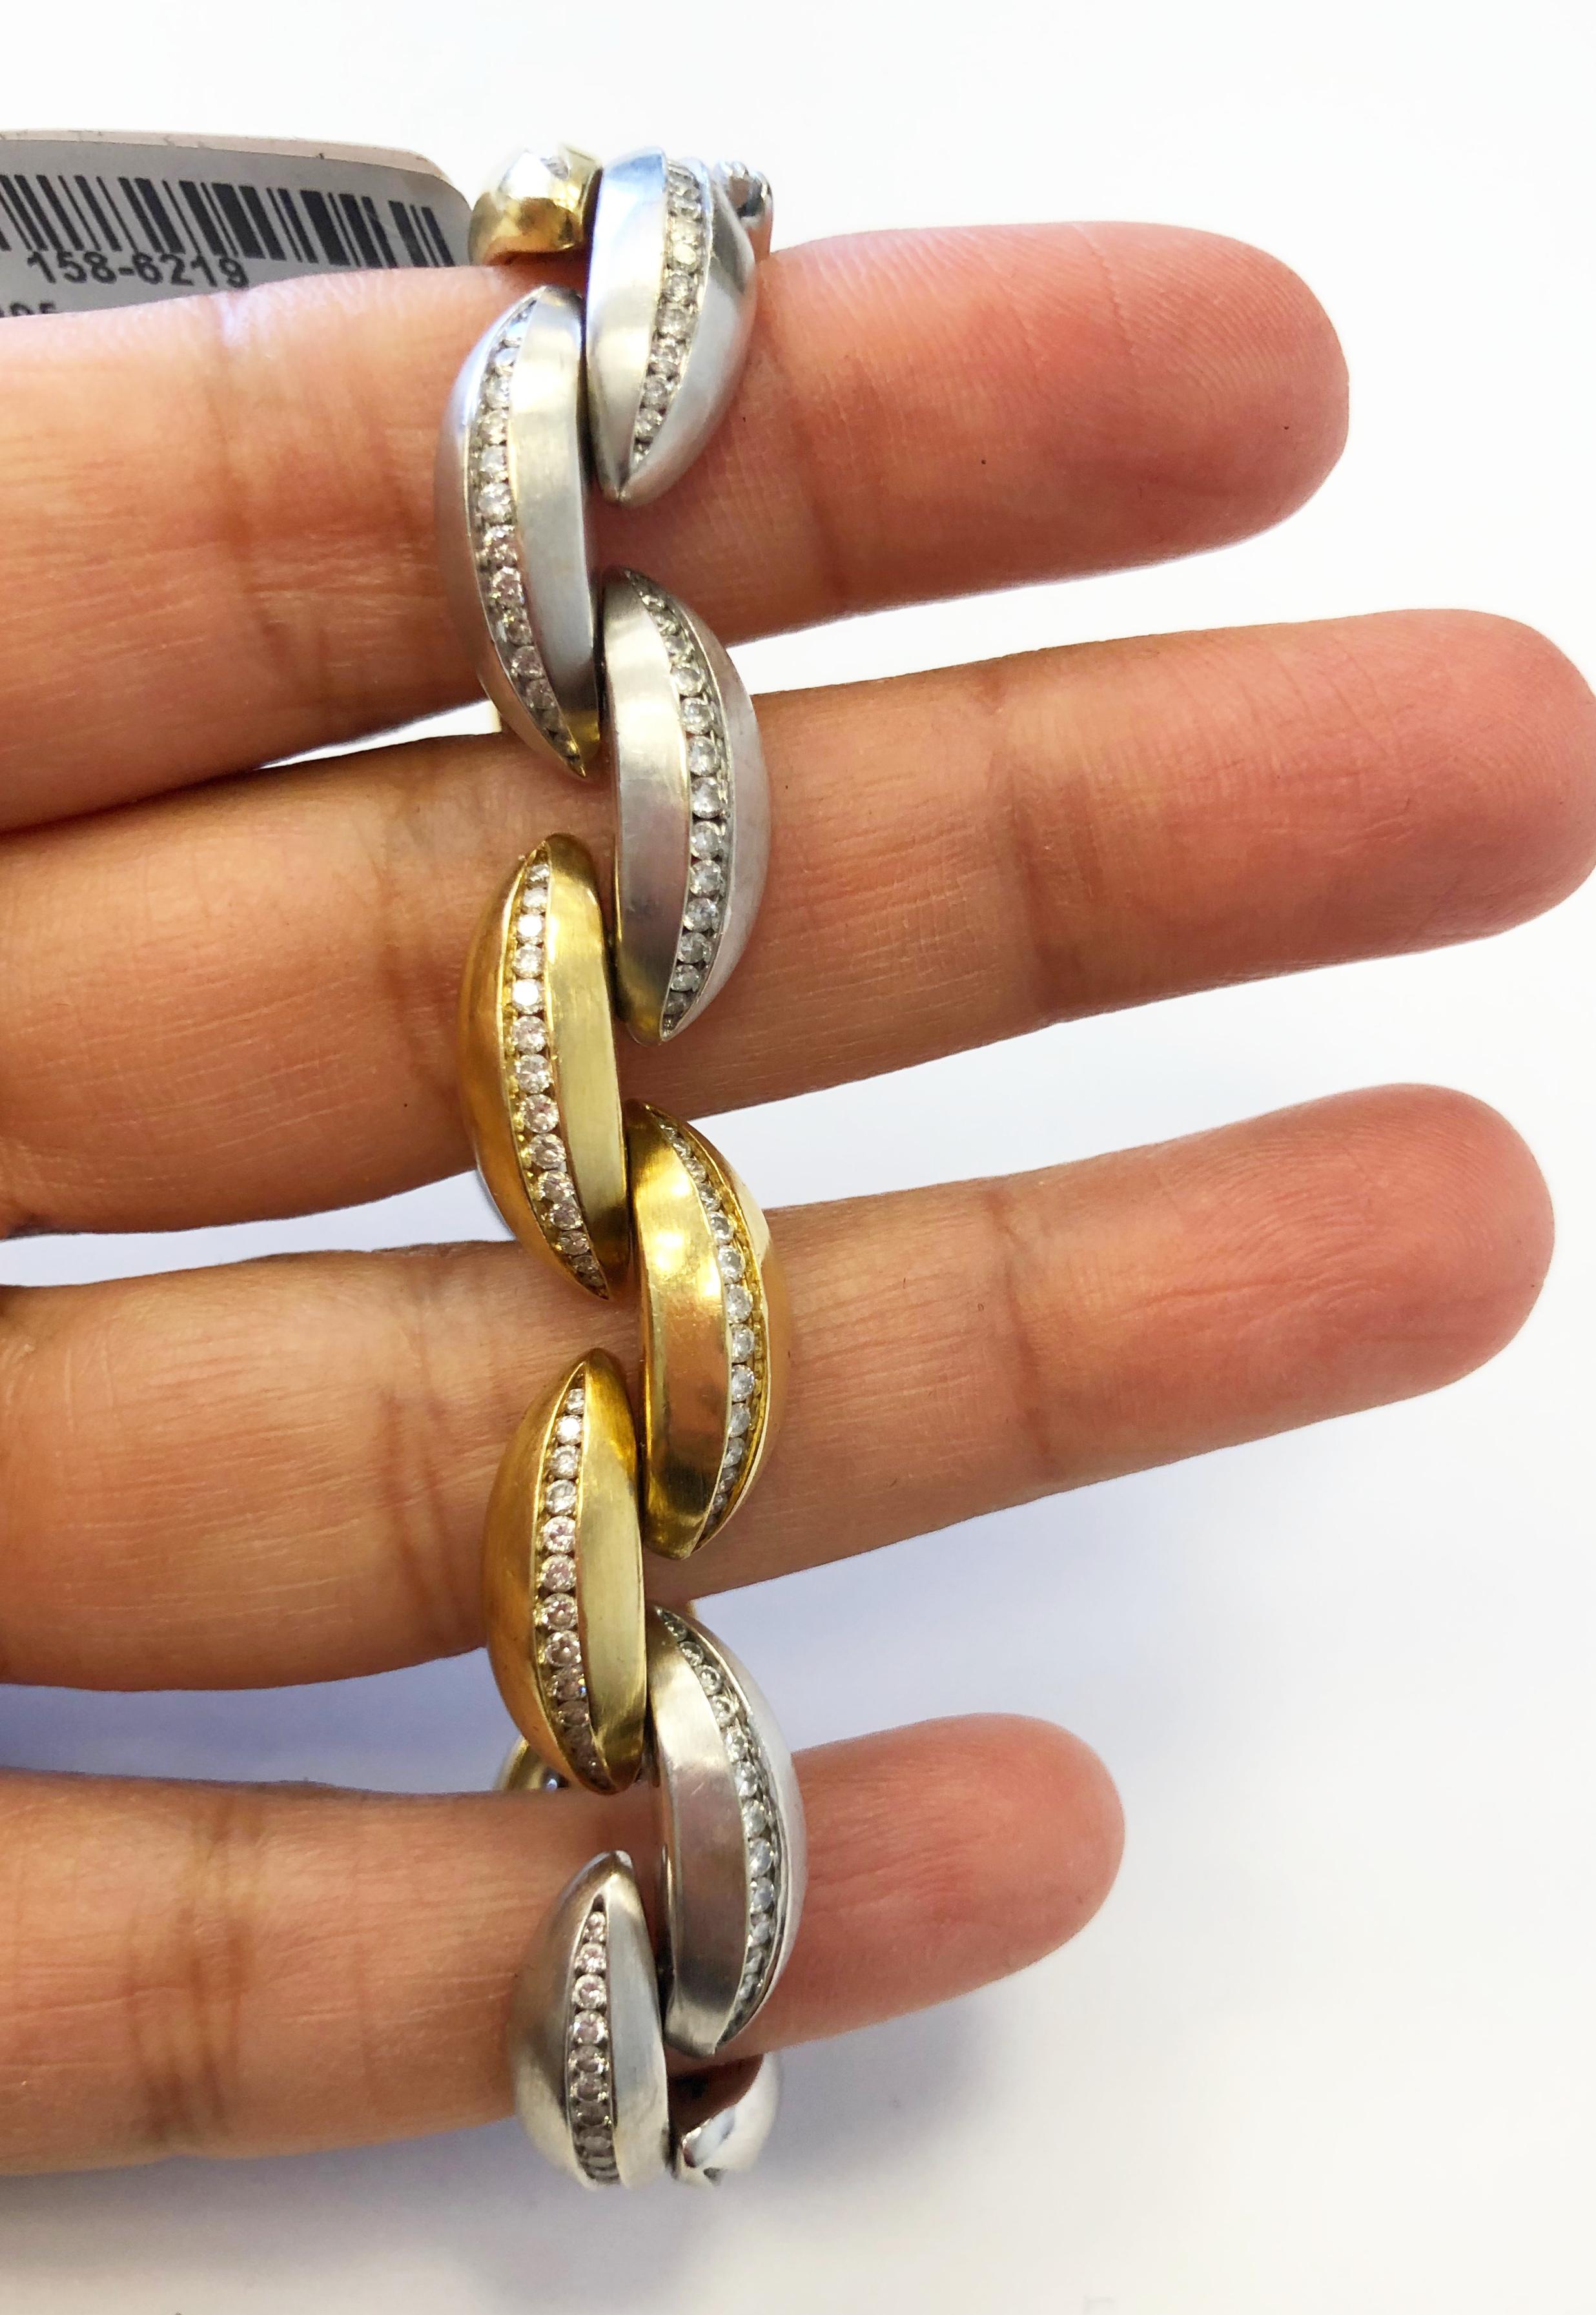 Stunning Tiffany & Company two tone gold bracelet with good quality, white diamonds weighing 3 carats.  Length of bracelet is 7.5